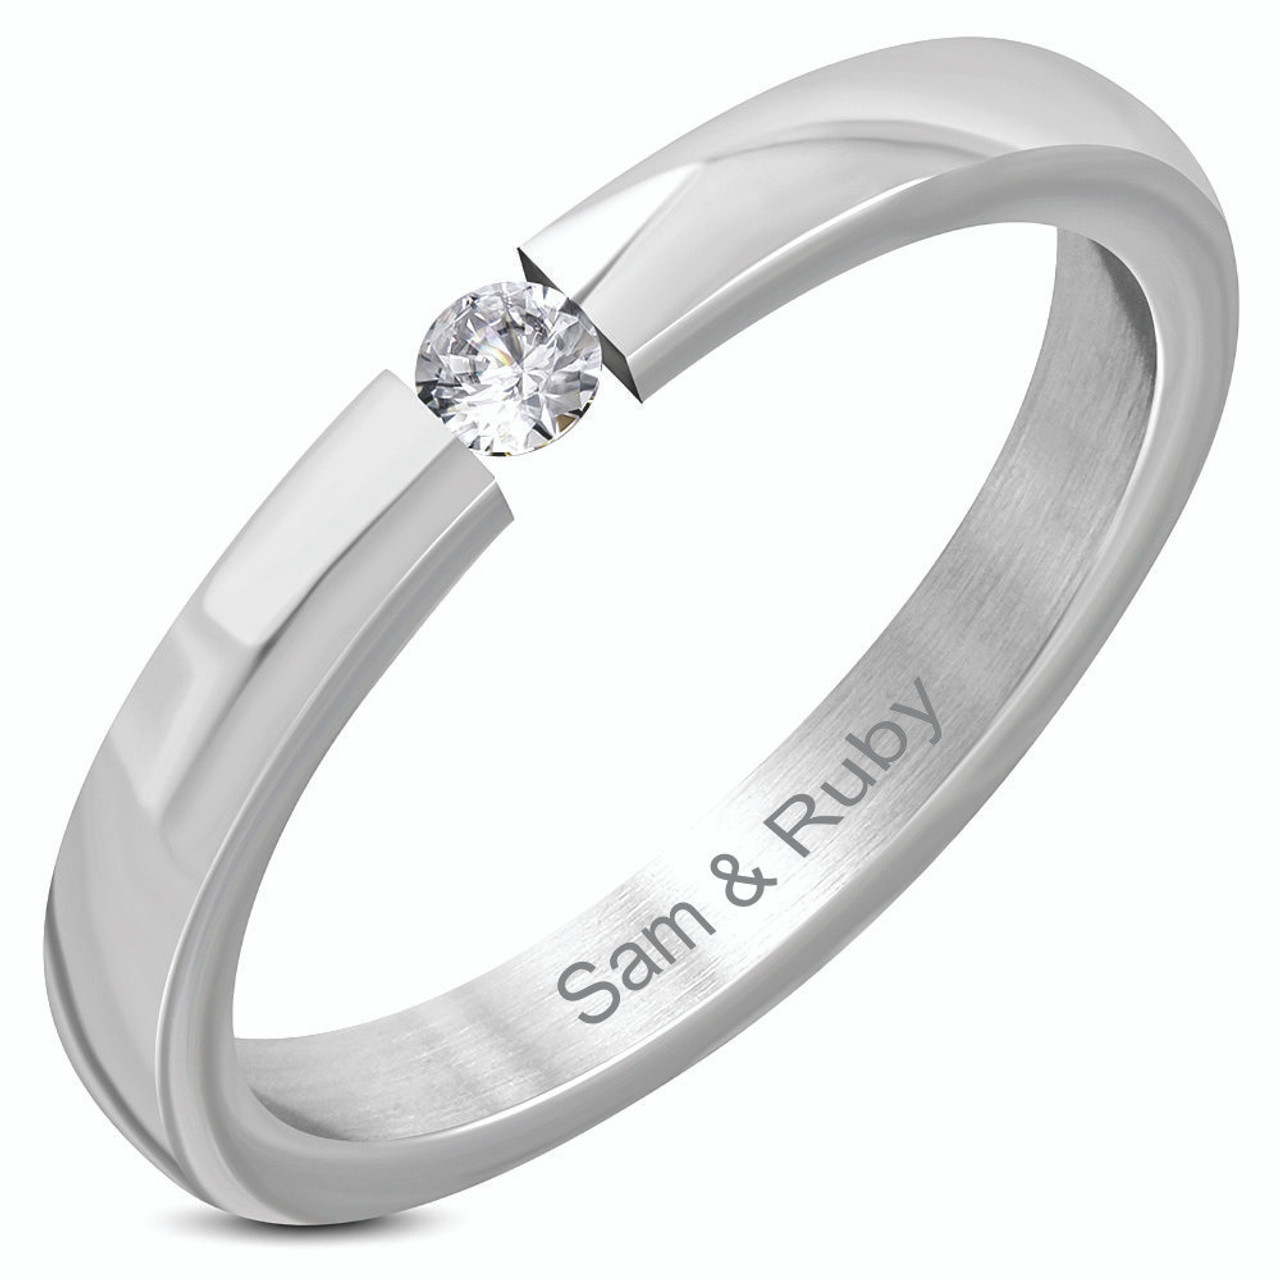 Personalized 3mm Stainless Steel Tension-Set Wedding Band Ring